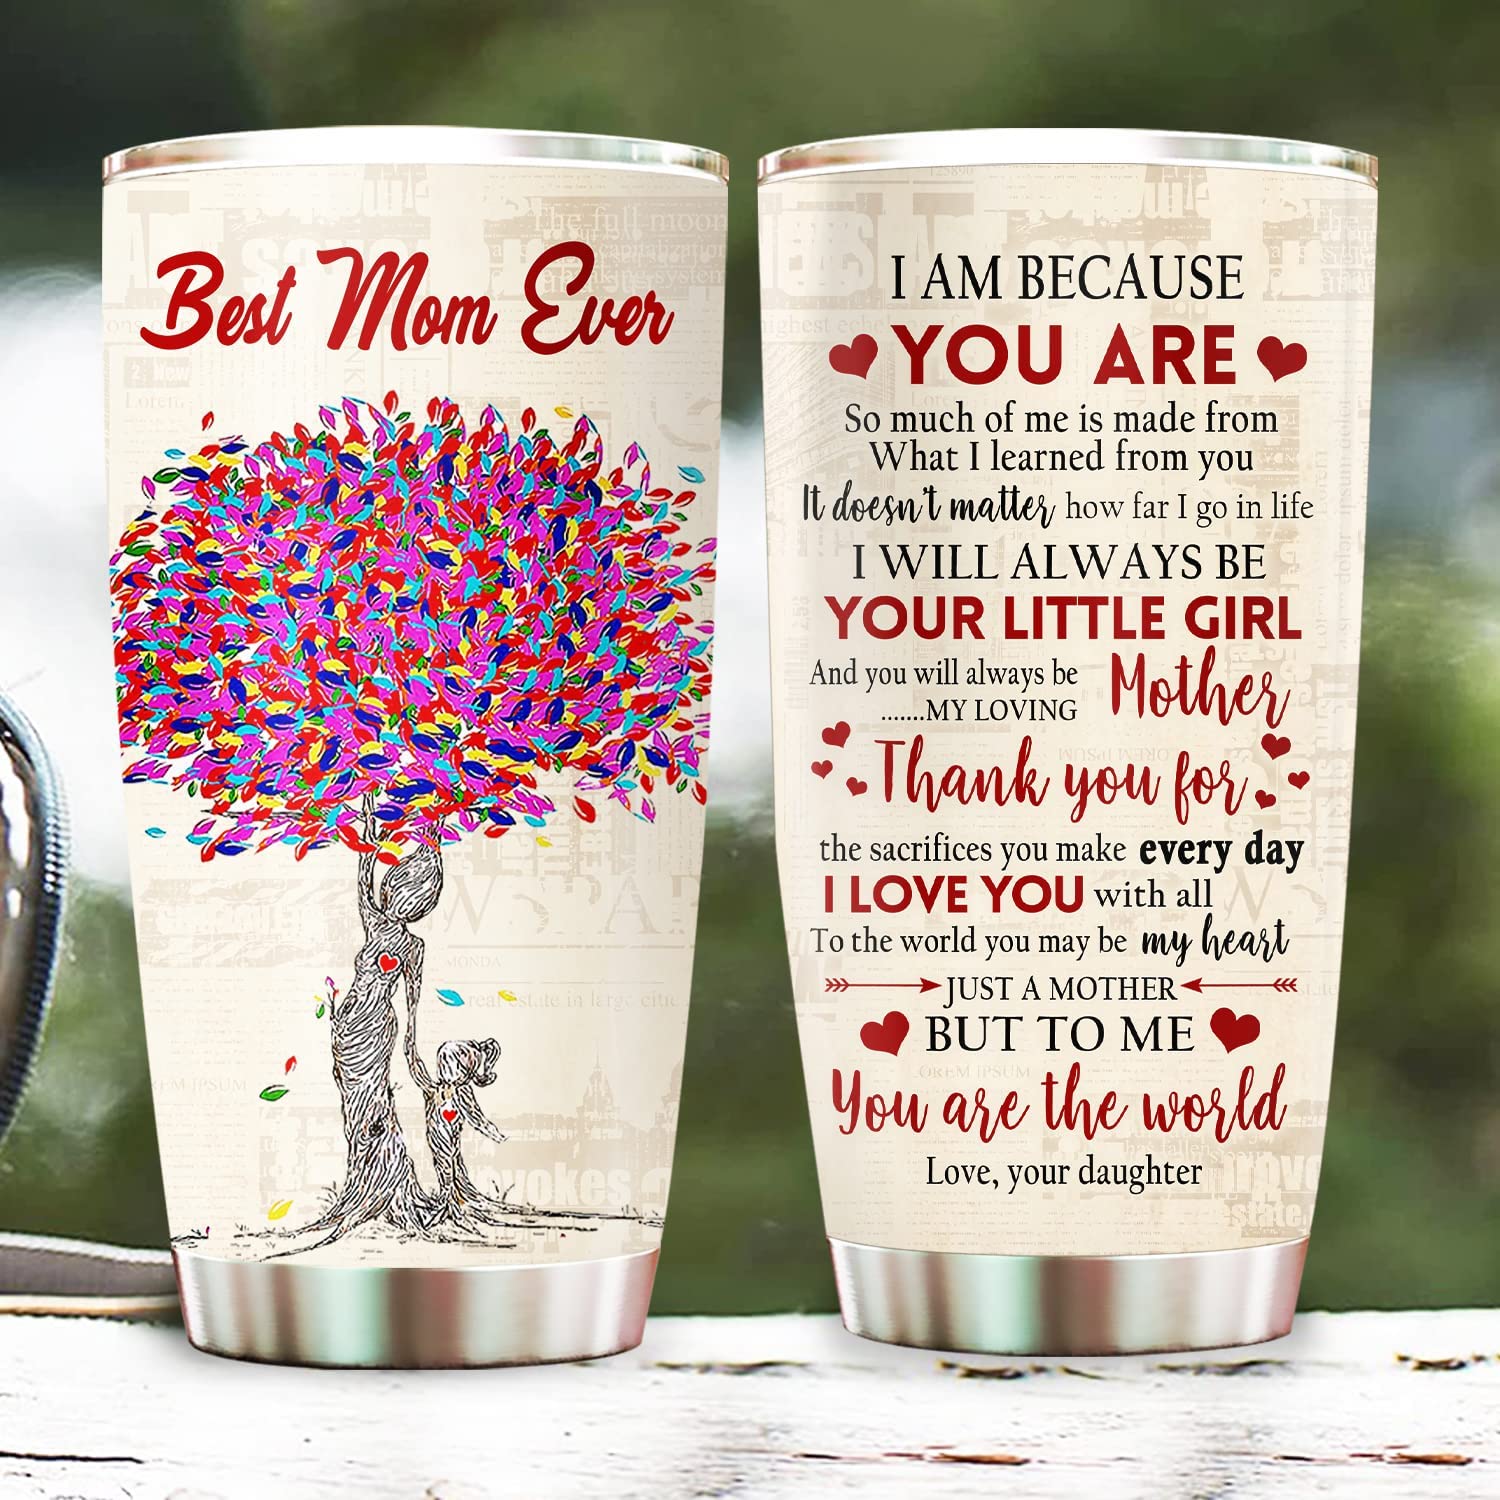 Mothers Day Gifts, Best Mom Ever Tumbler, Mother Mama Mom Gifts on Christmas Birthday, Birthday Gifts for Mom from Daughter 20oz Stainless Steel Tumbler Cup with Lid Cold & Hot Water Coffee